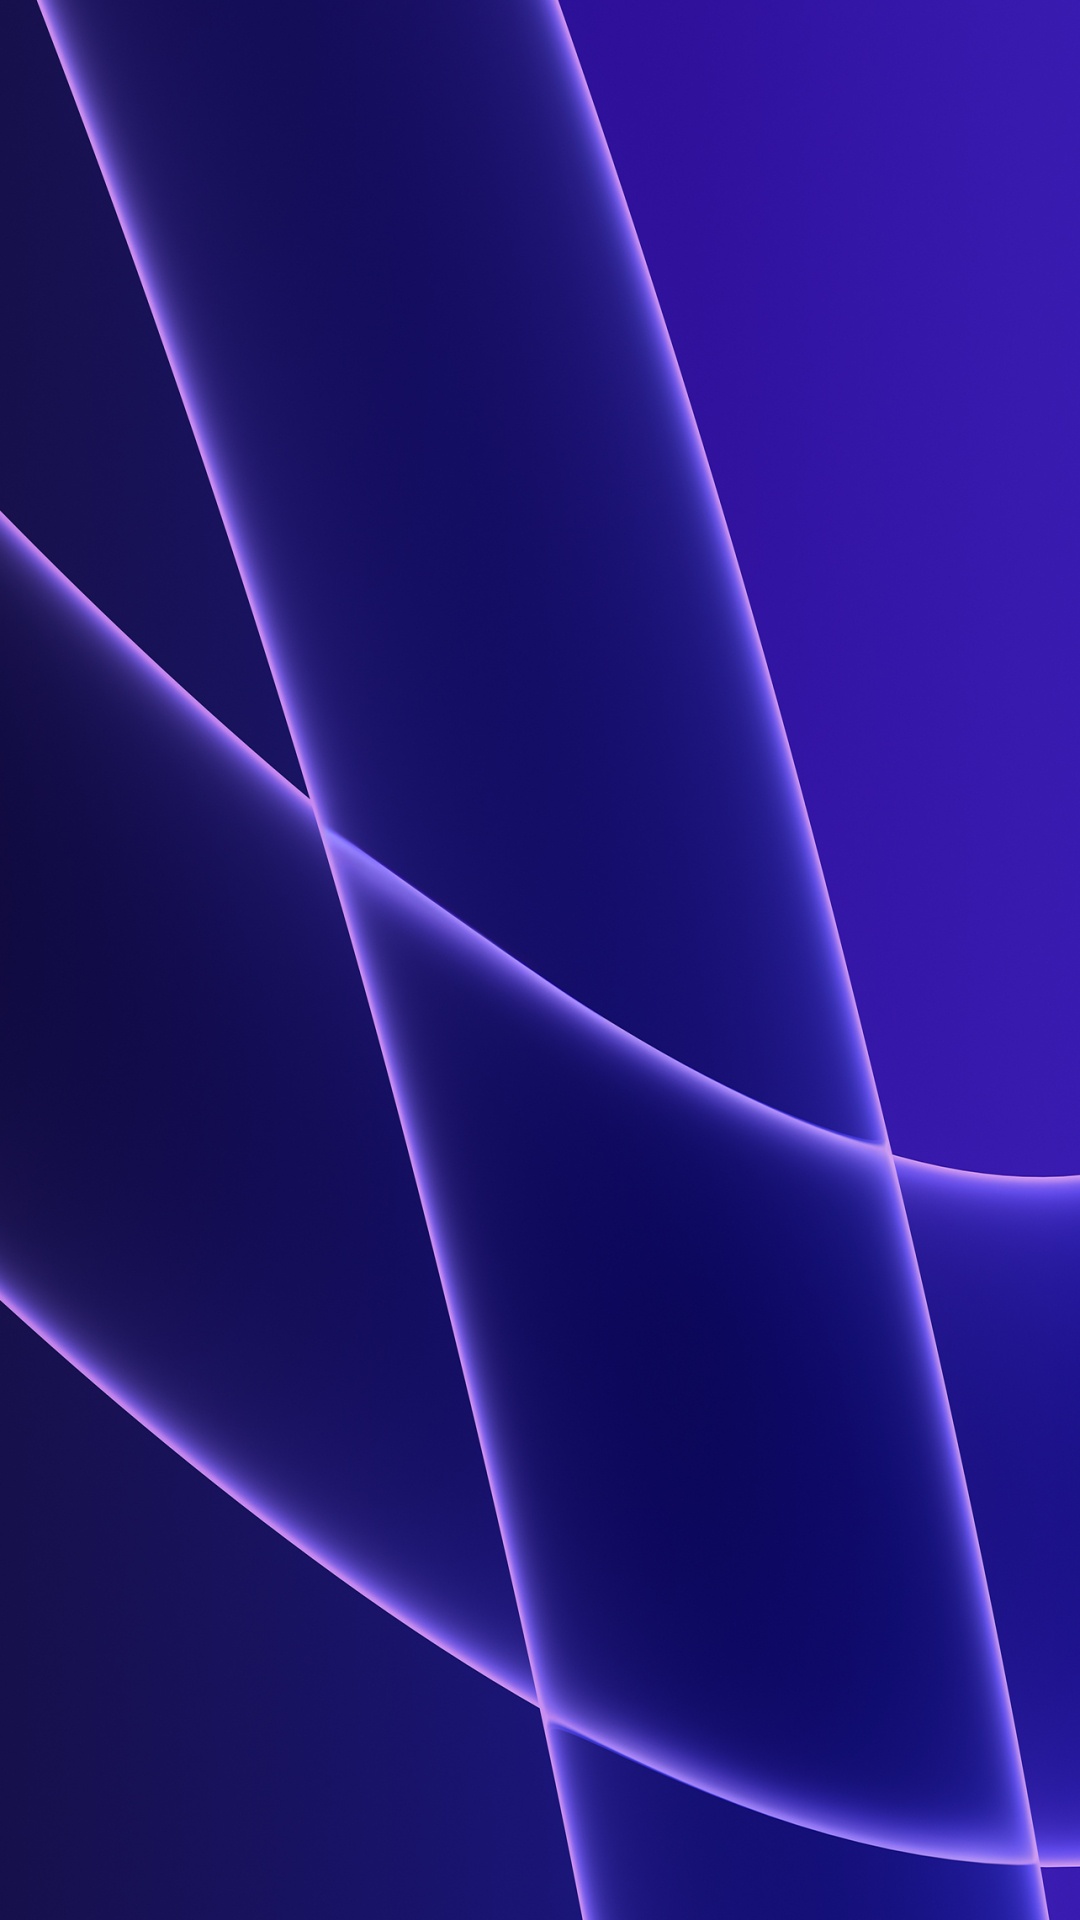 IMac Color Matching Wallpaper in Dark Purple for IPhone. Wallpaper in 1080x1920 Resolution